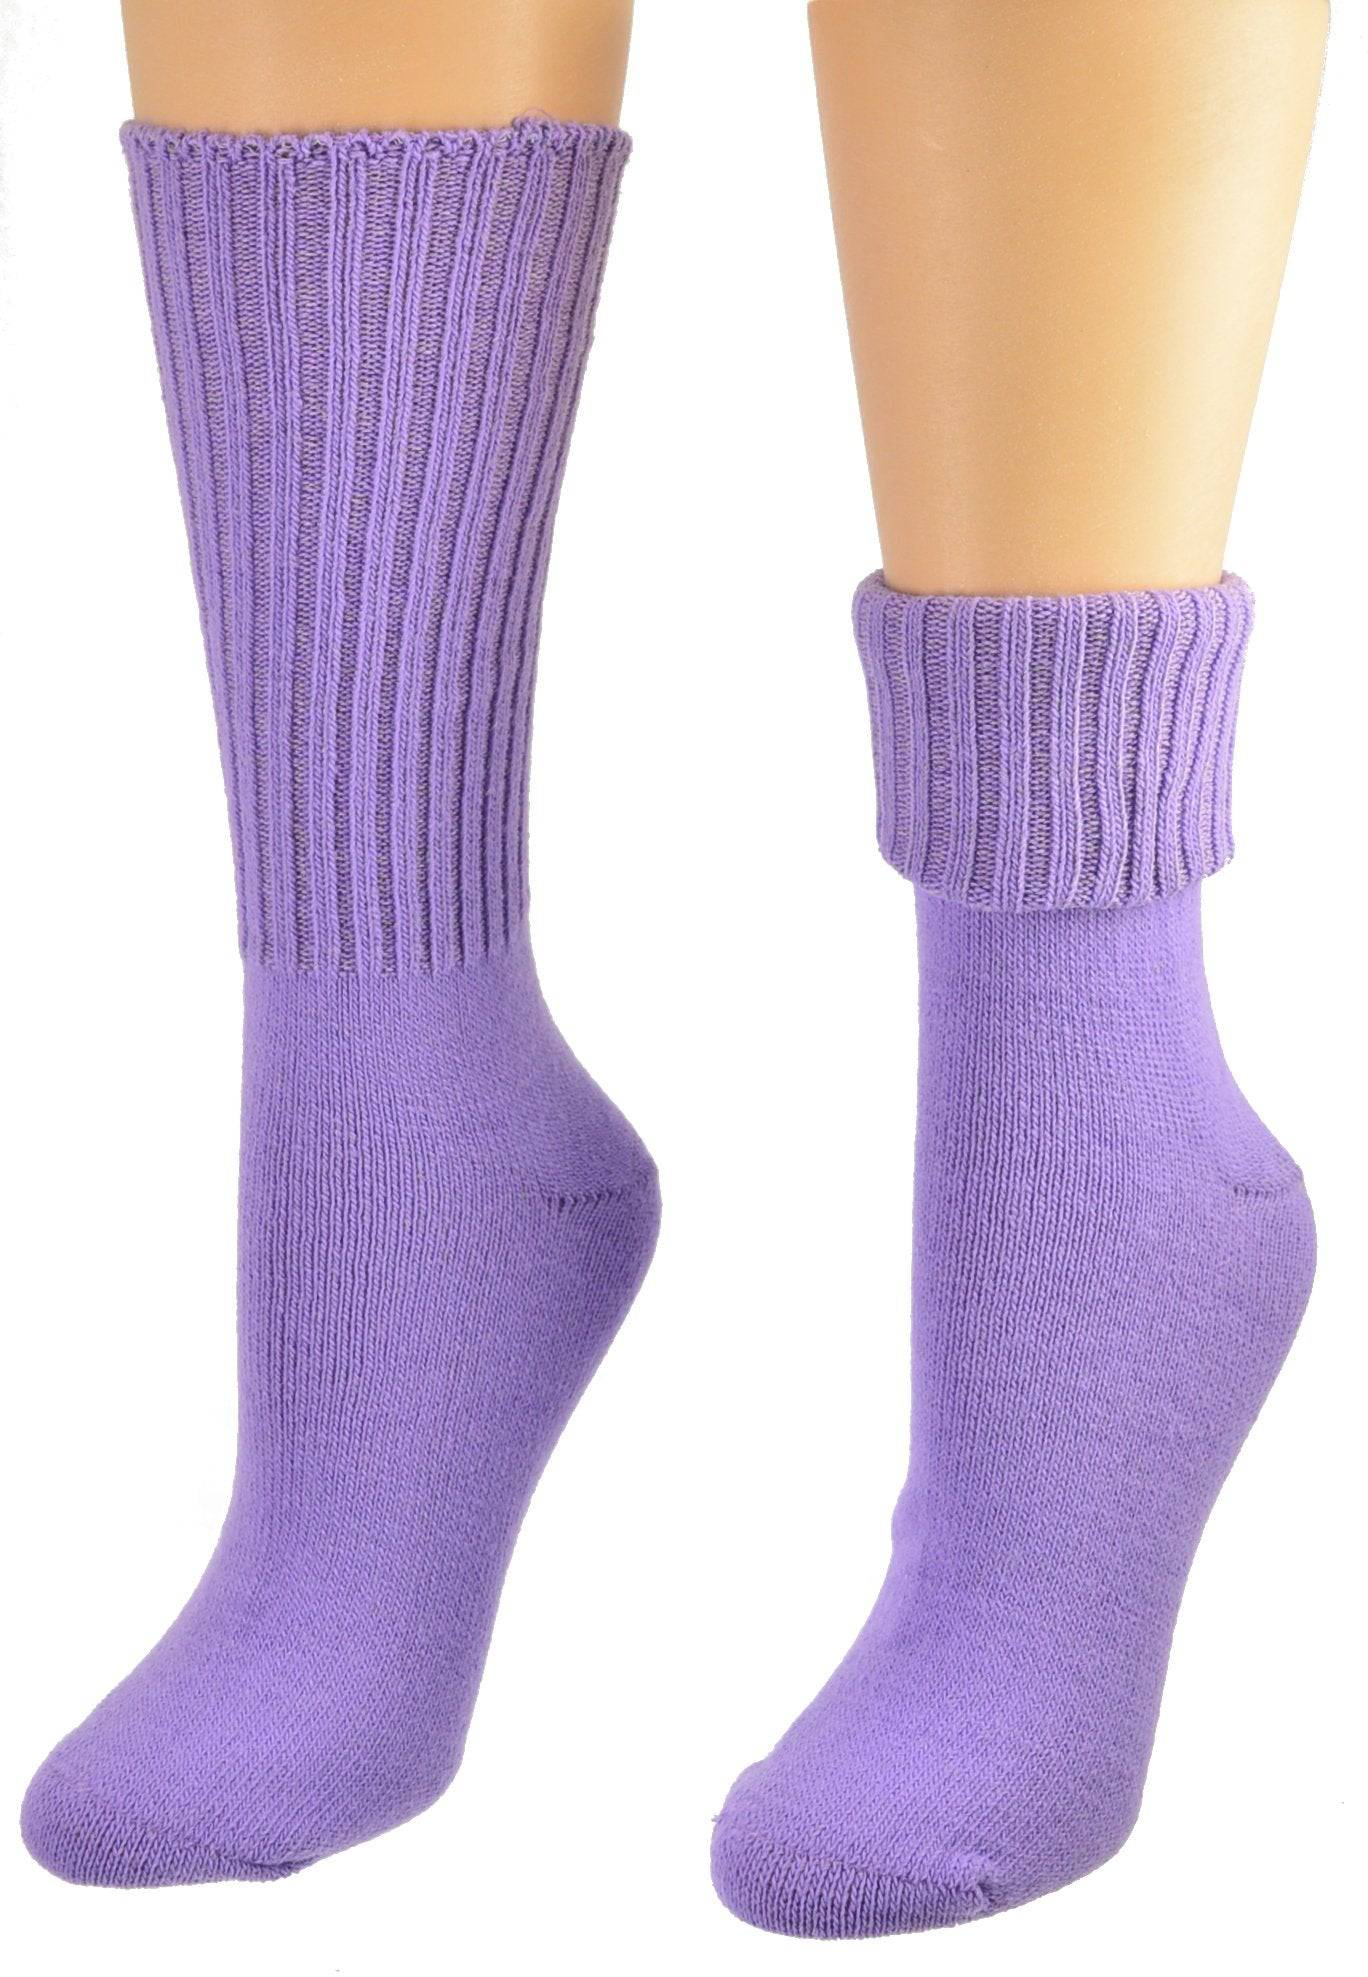 Solid Color Ribbed Crew Turn cuff Soft Acrylic Socks 3 Pair Pack Socks W300616